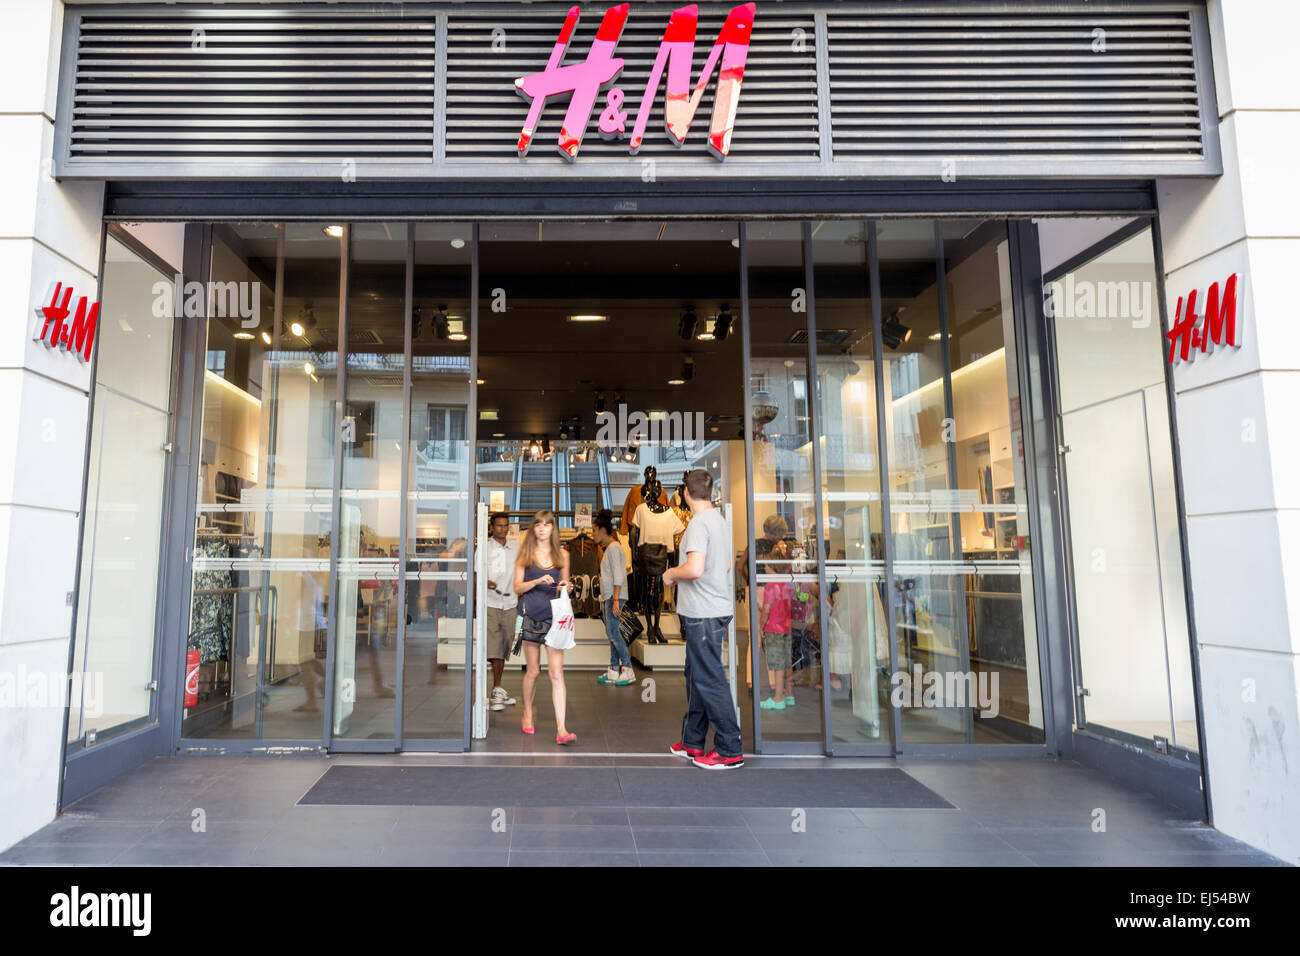 H&M - Hennes & Mauritz shop in Avignon, France, Europe Stock Photo